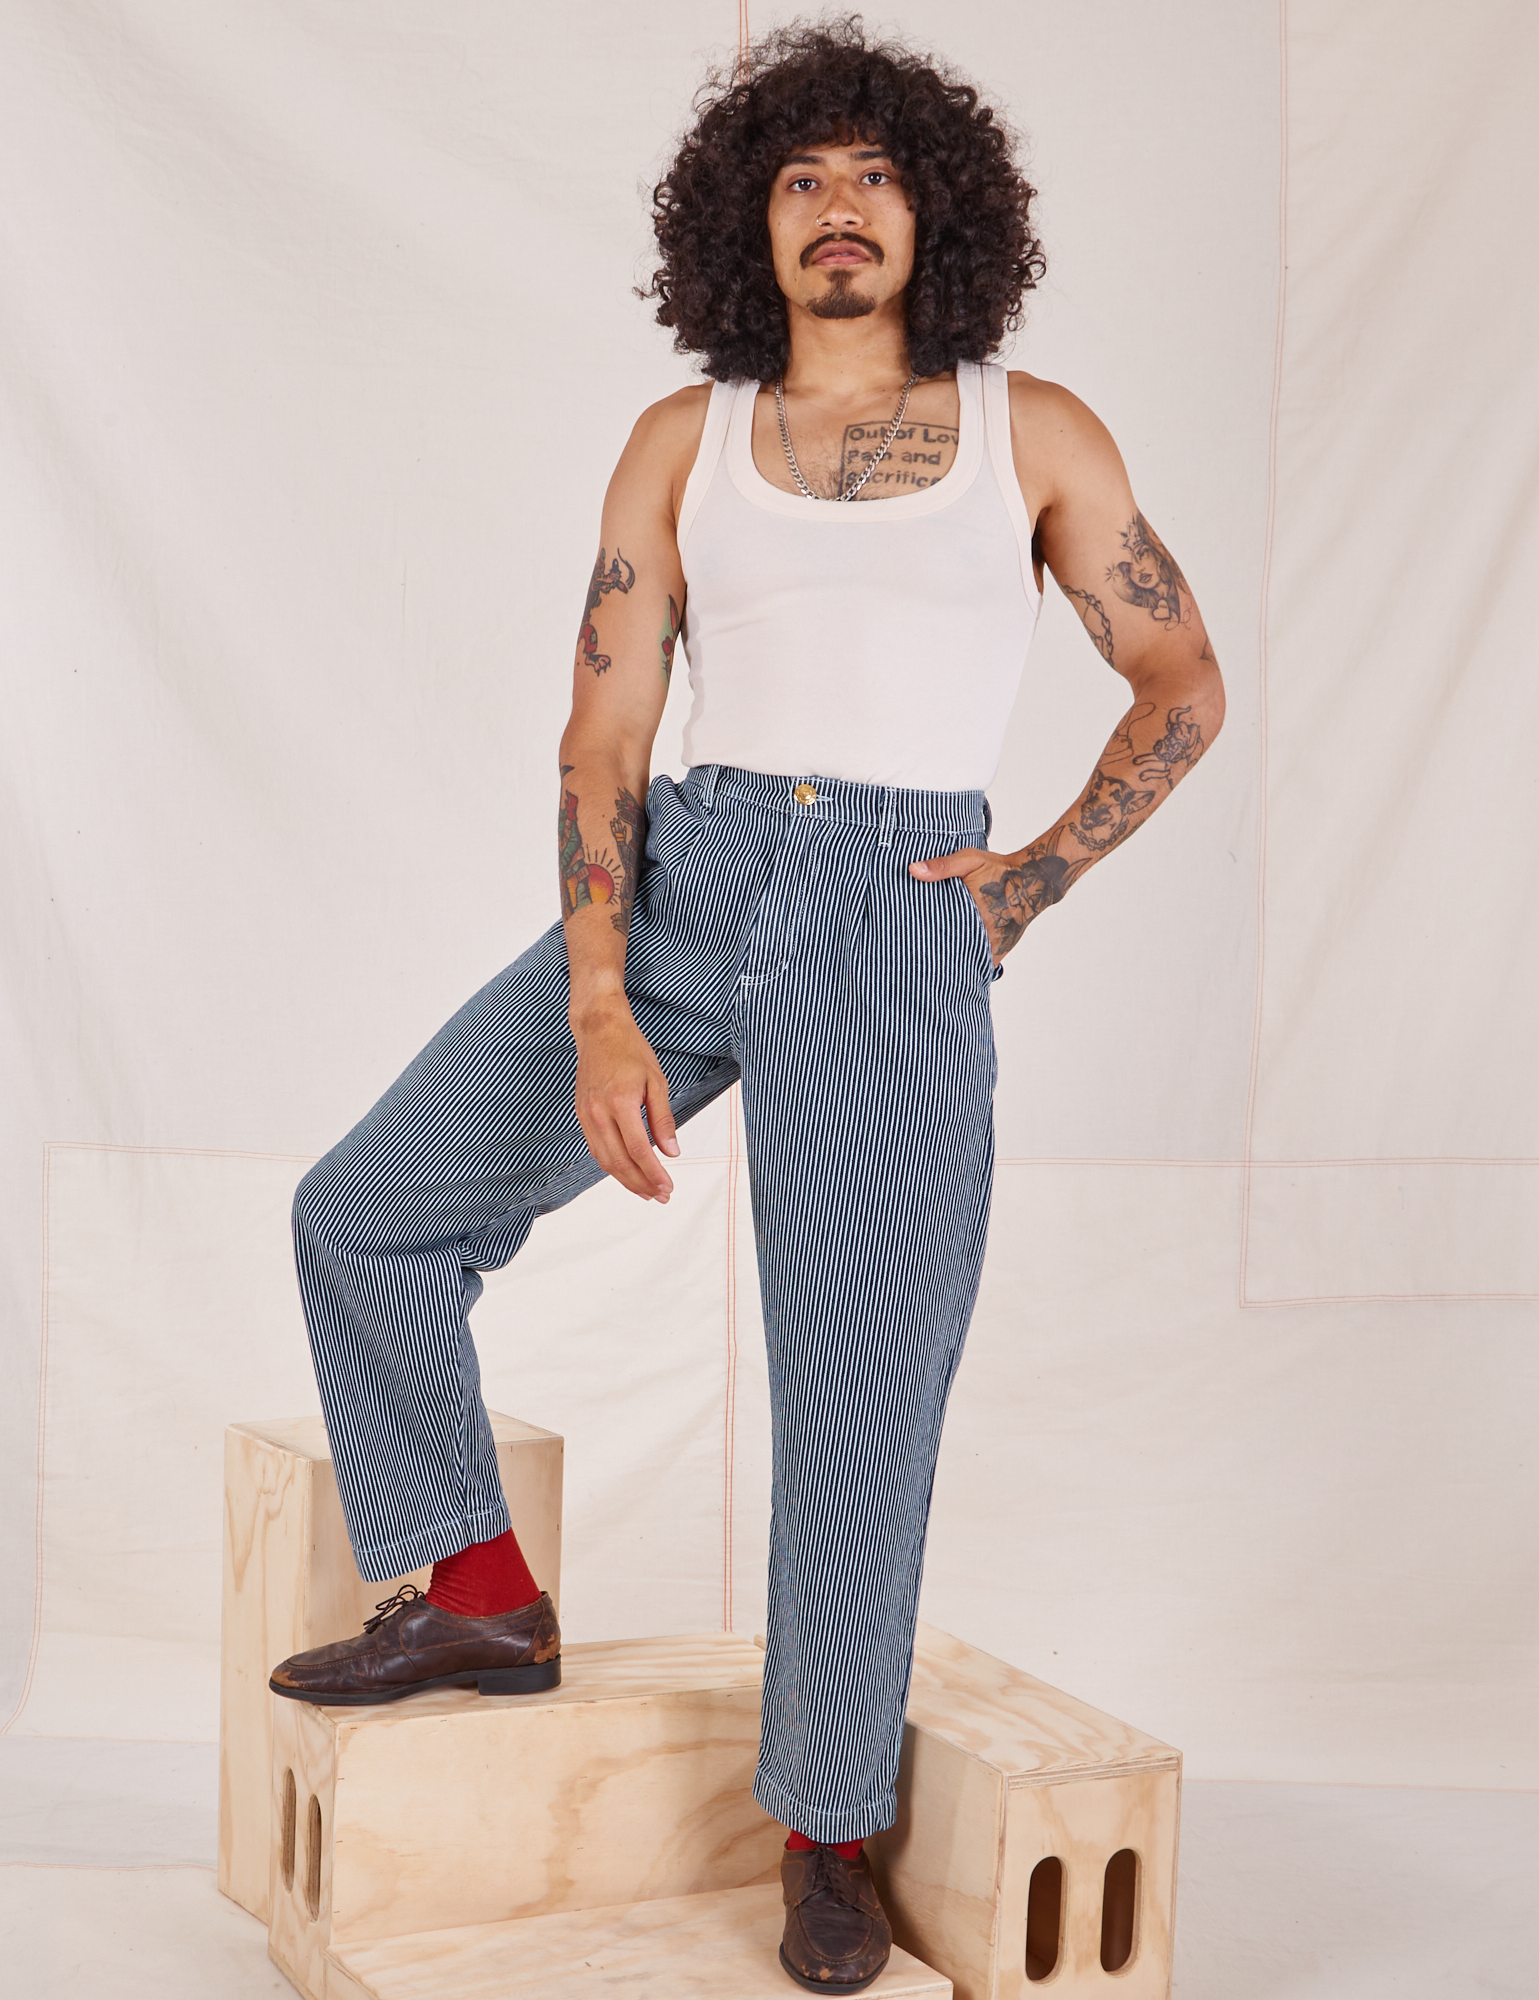 Jesse is wearing Denim Trouser Jeans in Railroad Stripe and vintage off-white Tank Top